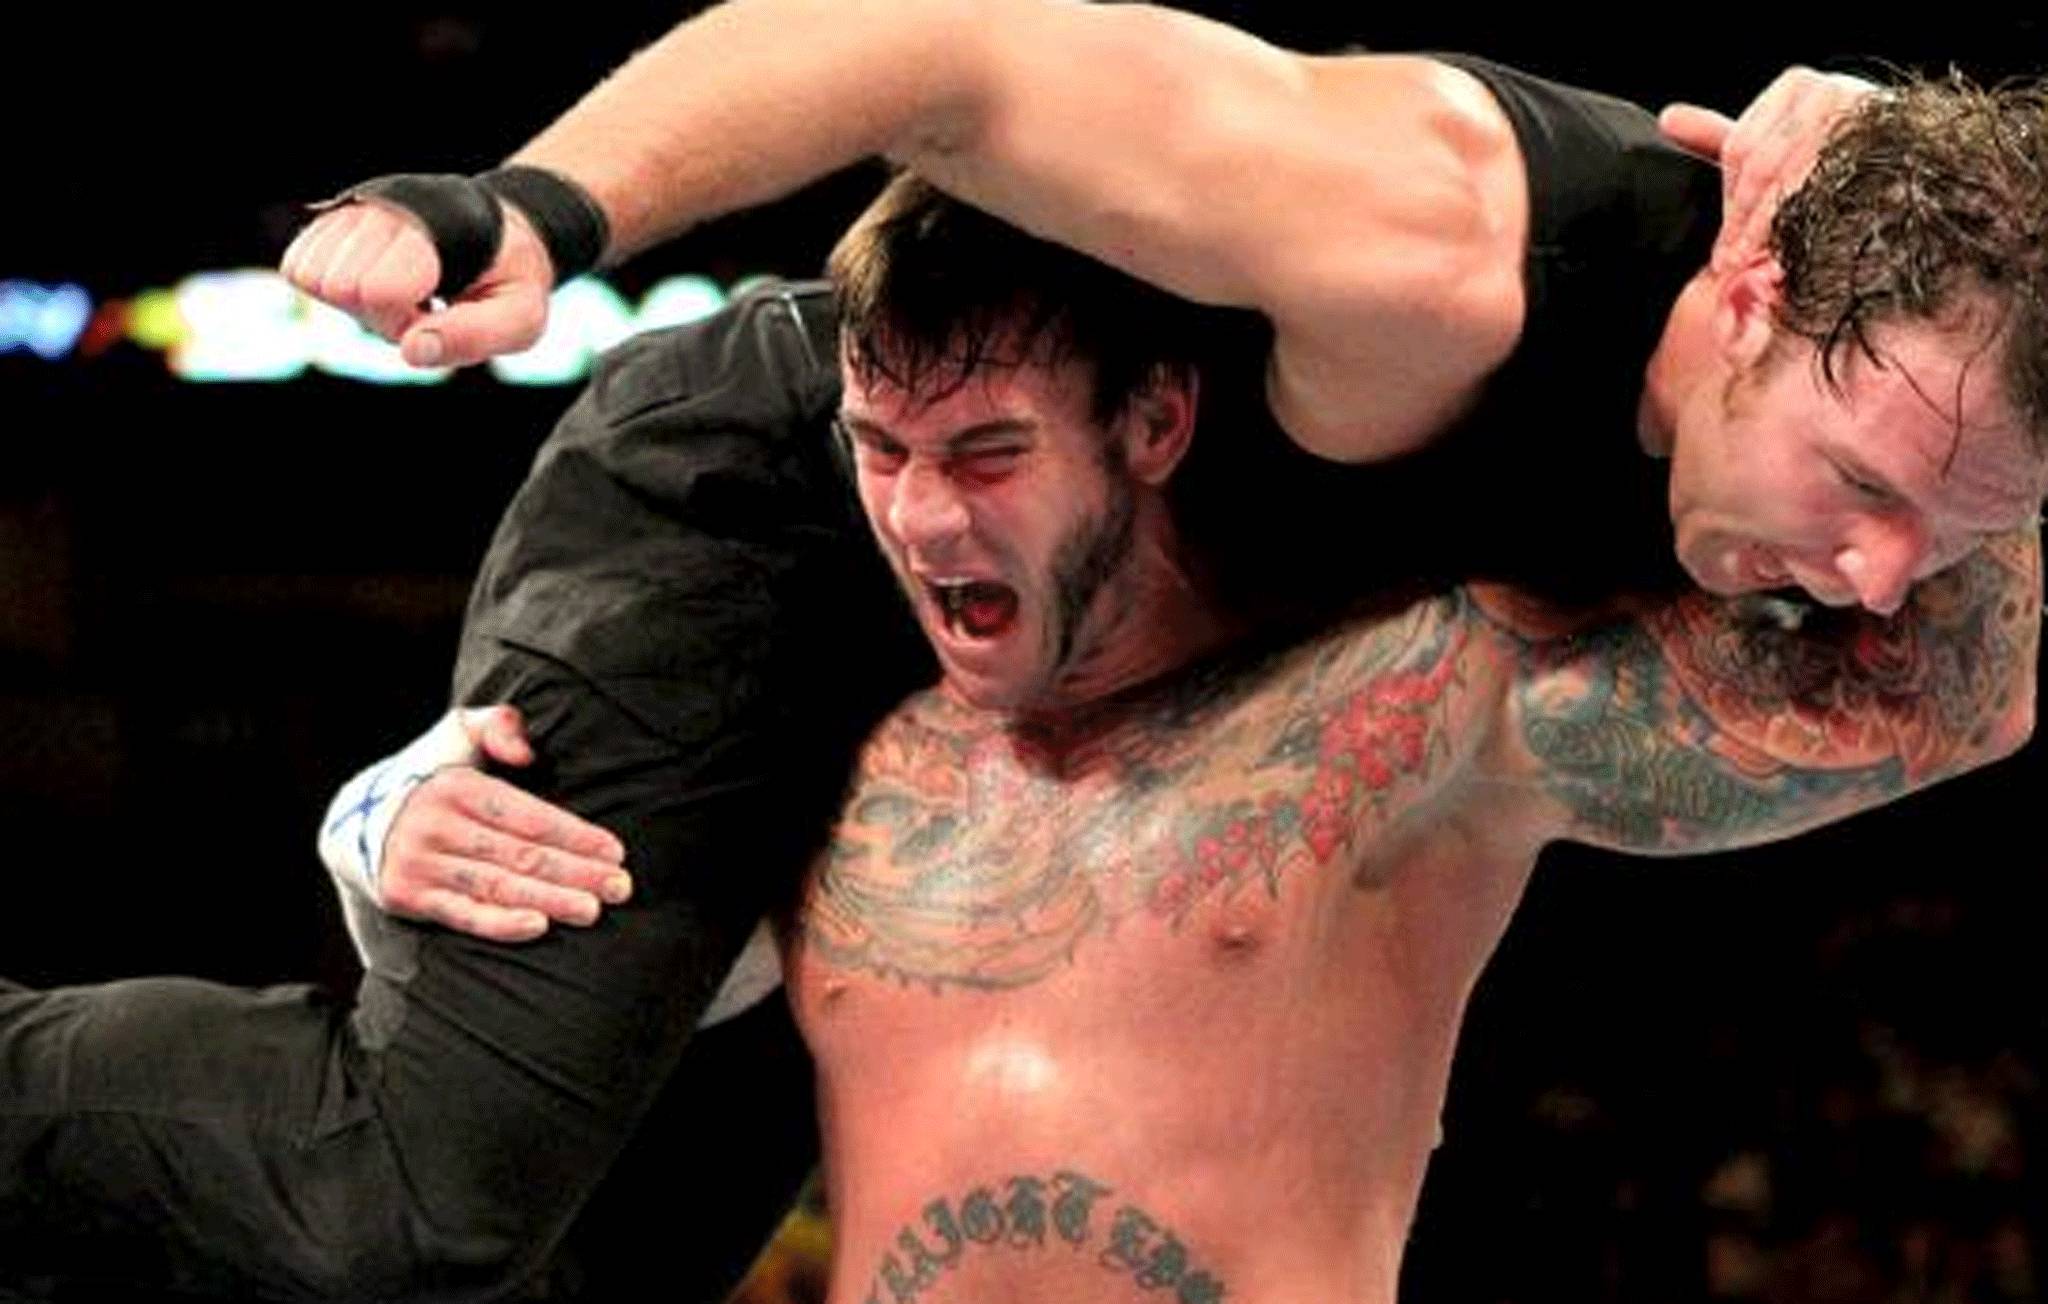 CM Punk back in his WWE days